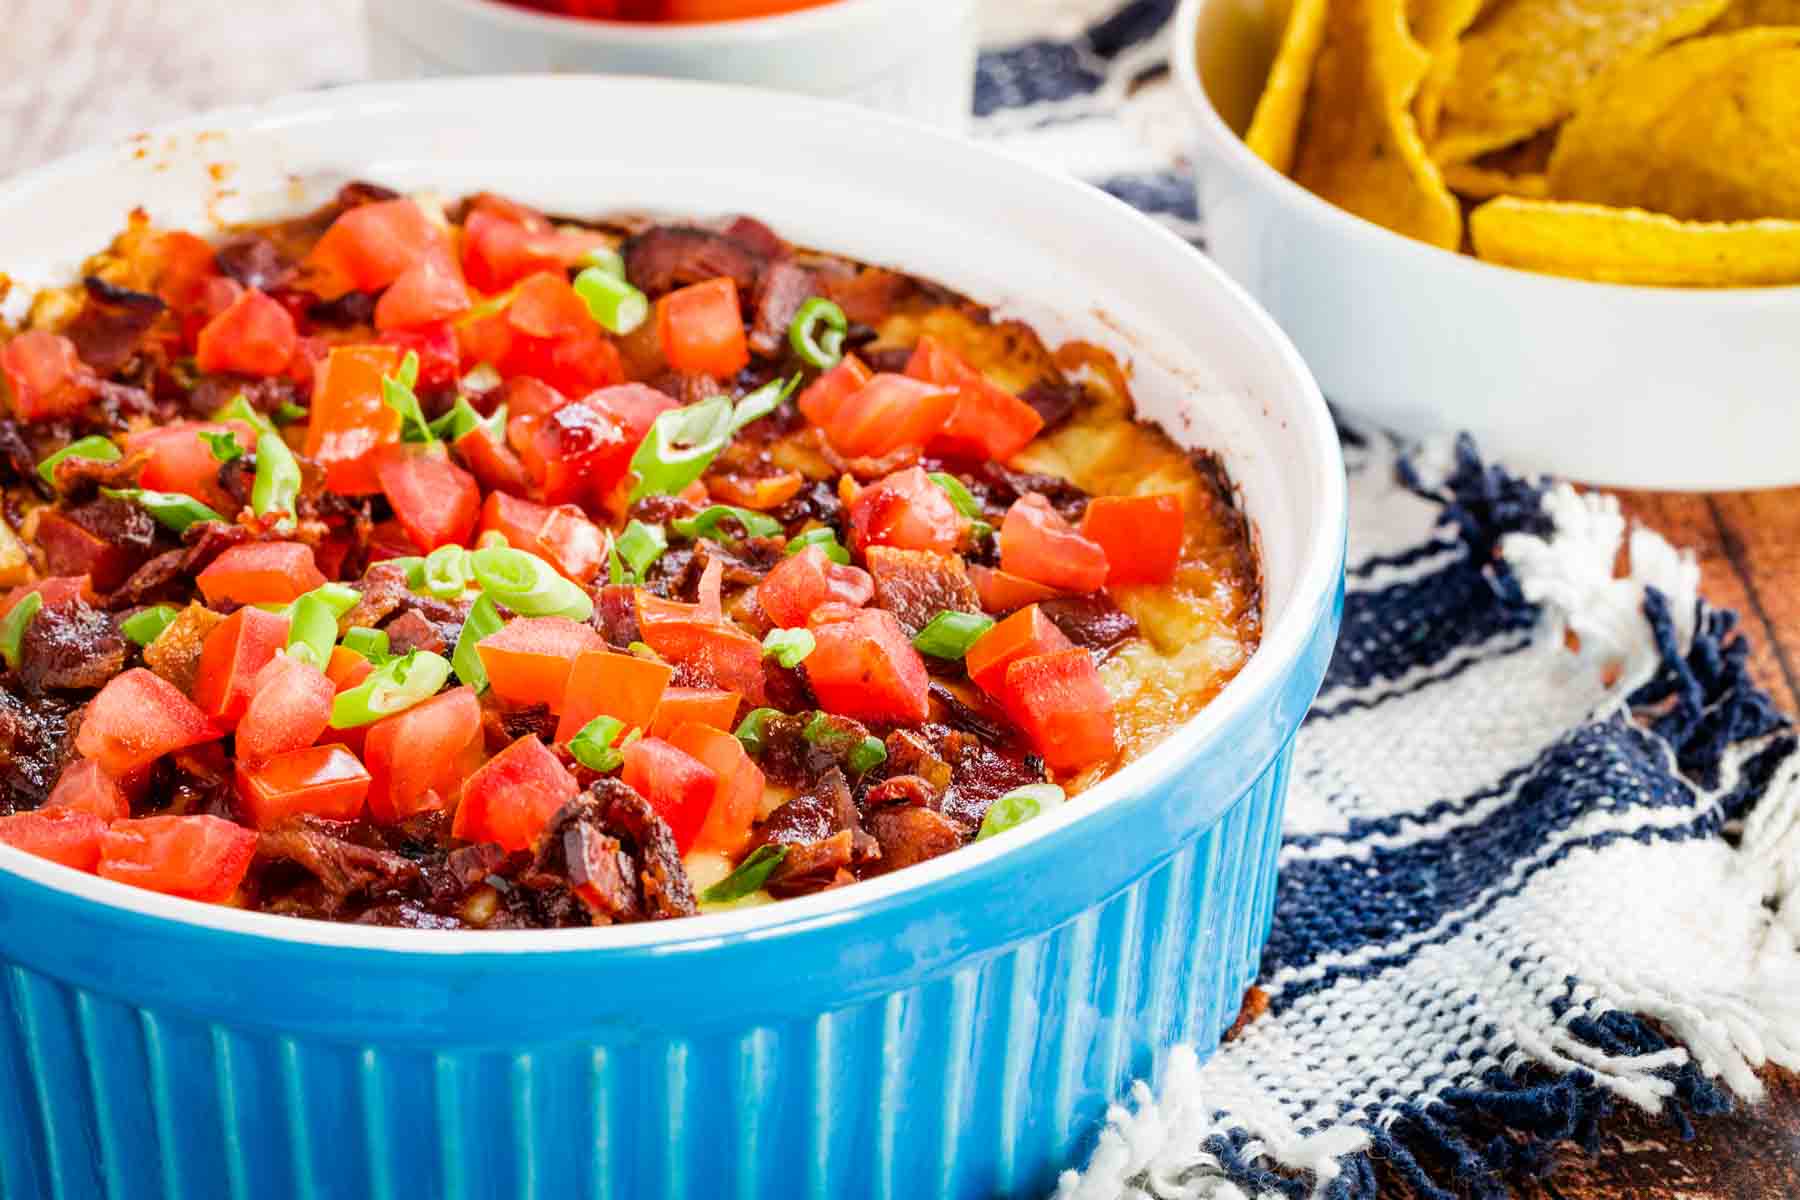 Hot dip in a casserole with a bowl of tortilla chips